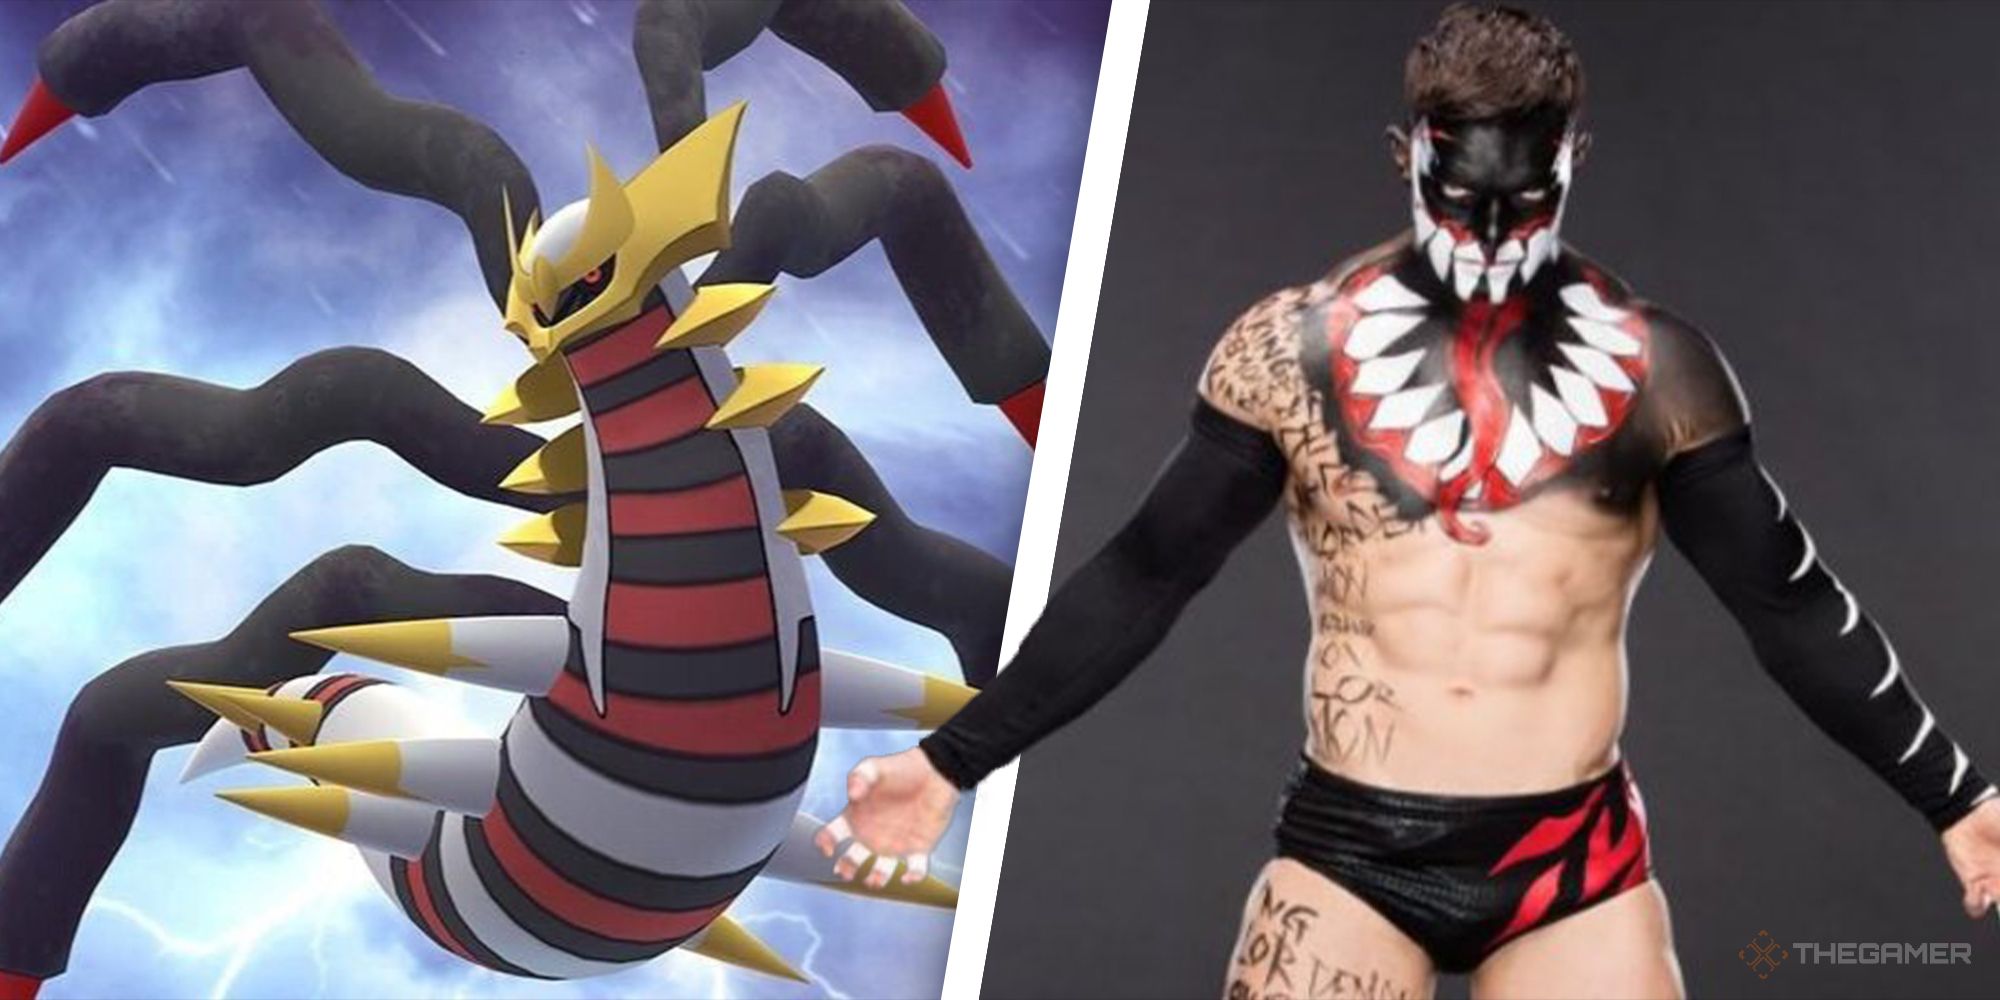 Heres 30 Wrestlers As Pokemon For The Royal Rumble (9)